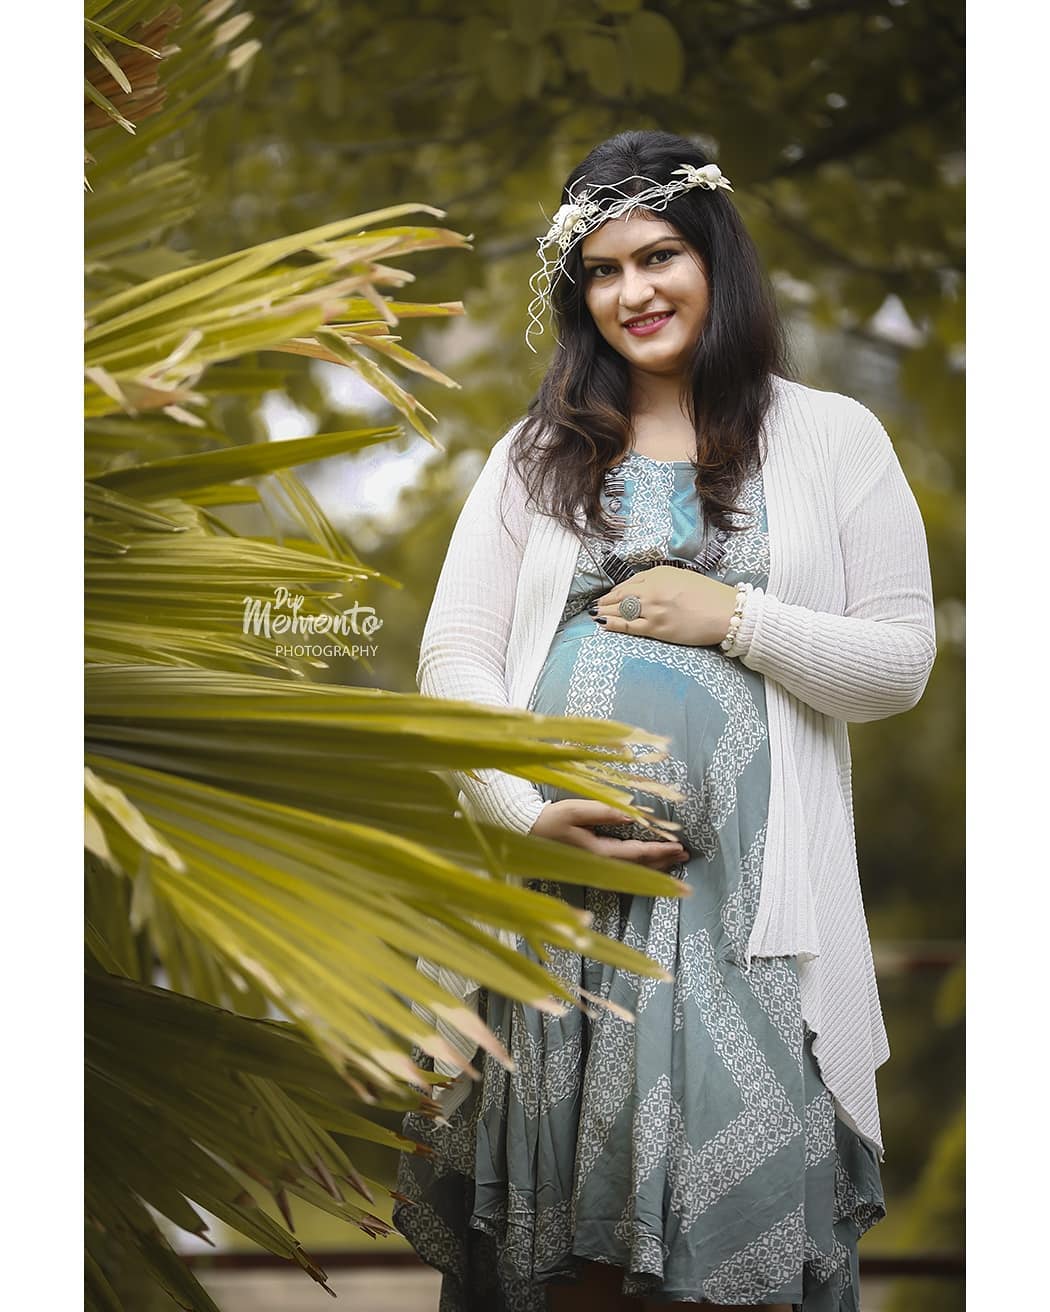 Waiting for the new miracle to happen.. 👶
.
Shoot by: @dip_memento_photography
.
 your inquiry @ 9924227745. :)
.
#maternityphotoshoot #maternityphotoshootideas #maternityphotoideas  #maternityphotography #maternityphotographer #pregnancyphotoshoot  #babybumpphotography #babybumpphotoshoot #babybump #bestpregnancyphotos#bestpregnancyphotographer #pregnancy #ahmedabadphotographer #bestphotographerofahmedabad #photostudio #bestphotographerinindia #9924227745 #maternityphotography #momtobe #mommytobe #maternityshoot #dipmementophotography  #maternitystyle  #pregnantfashion #maternitysession  #babyshower